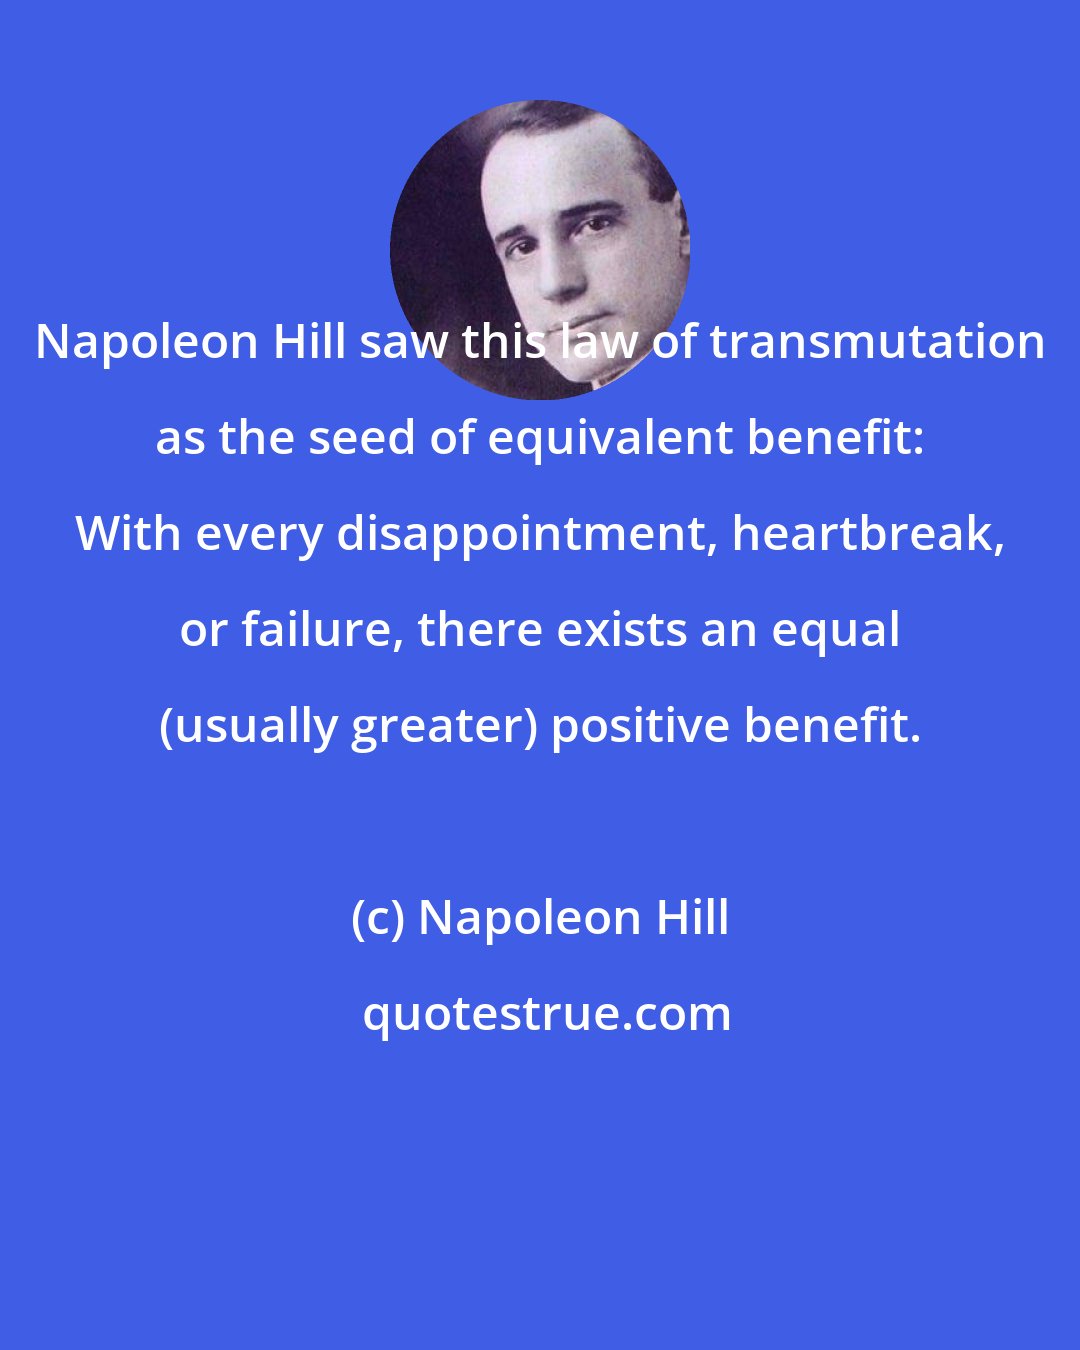 Napoleon Hill: Napoleon Hill saw this law of transmutation as the seed of equivalent benefit: With every disappointment, heartbreak, or failure, there exists an equal (usually greater) positive benefit.